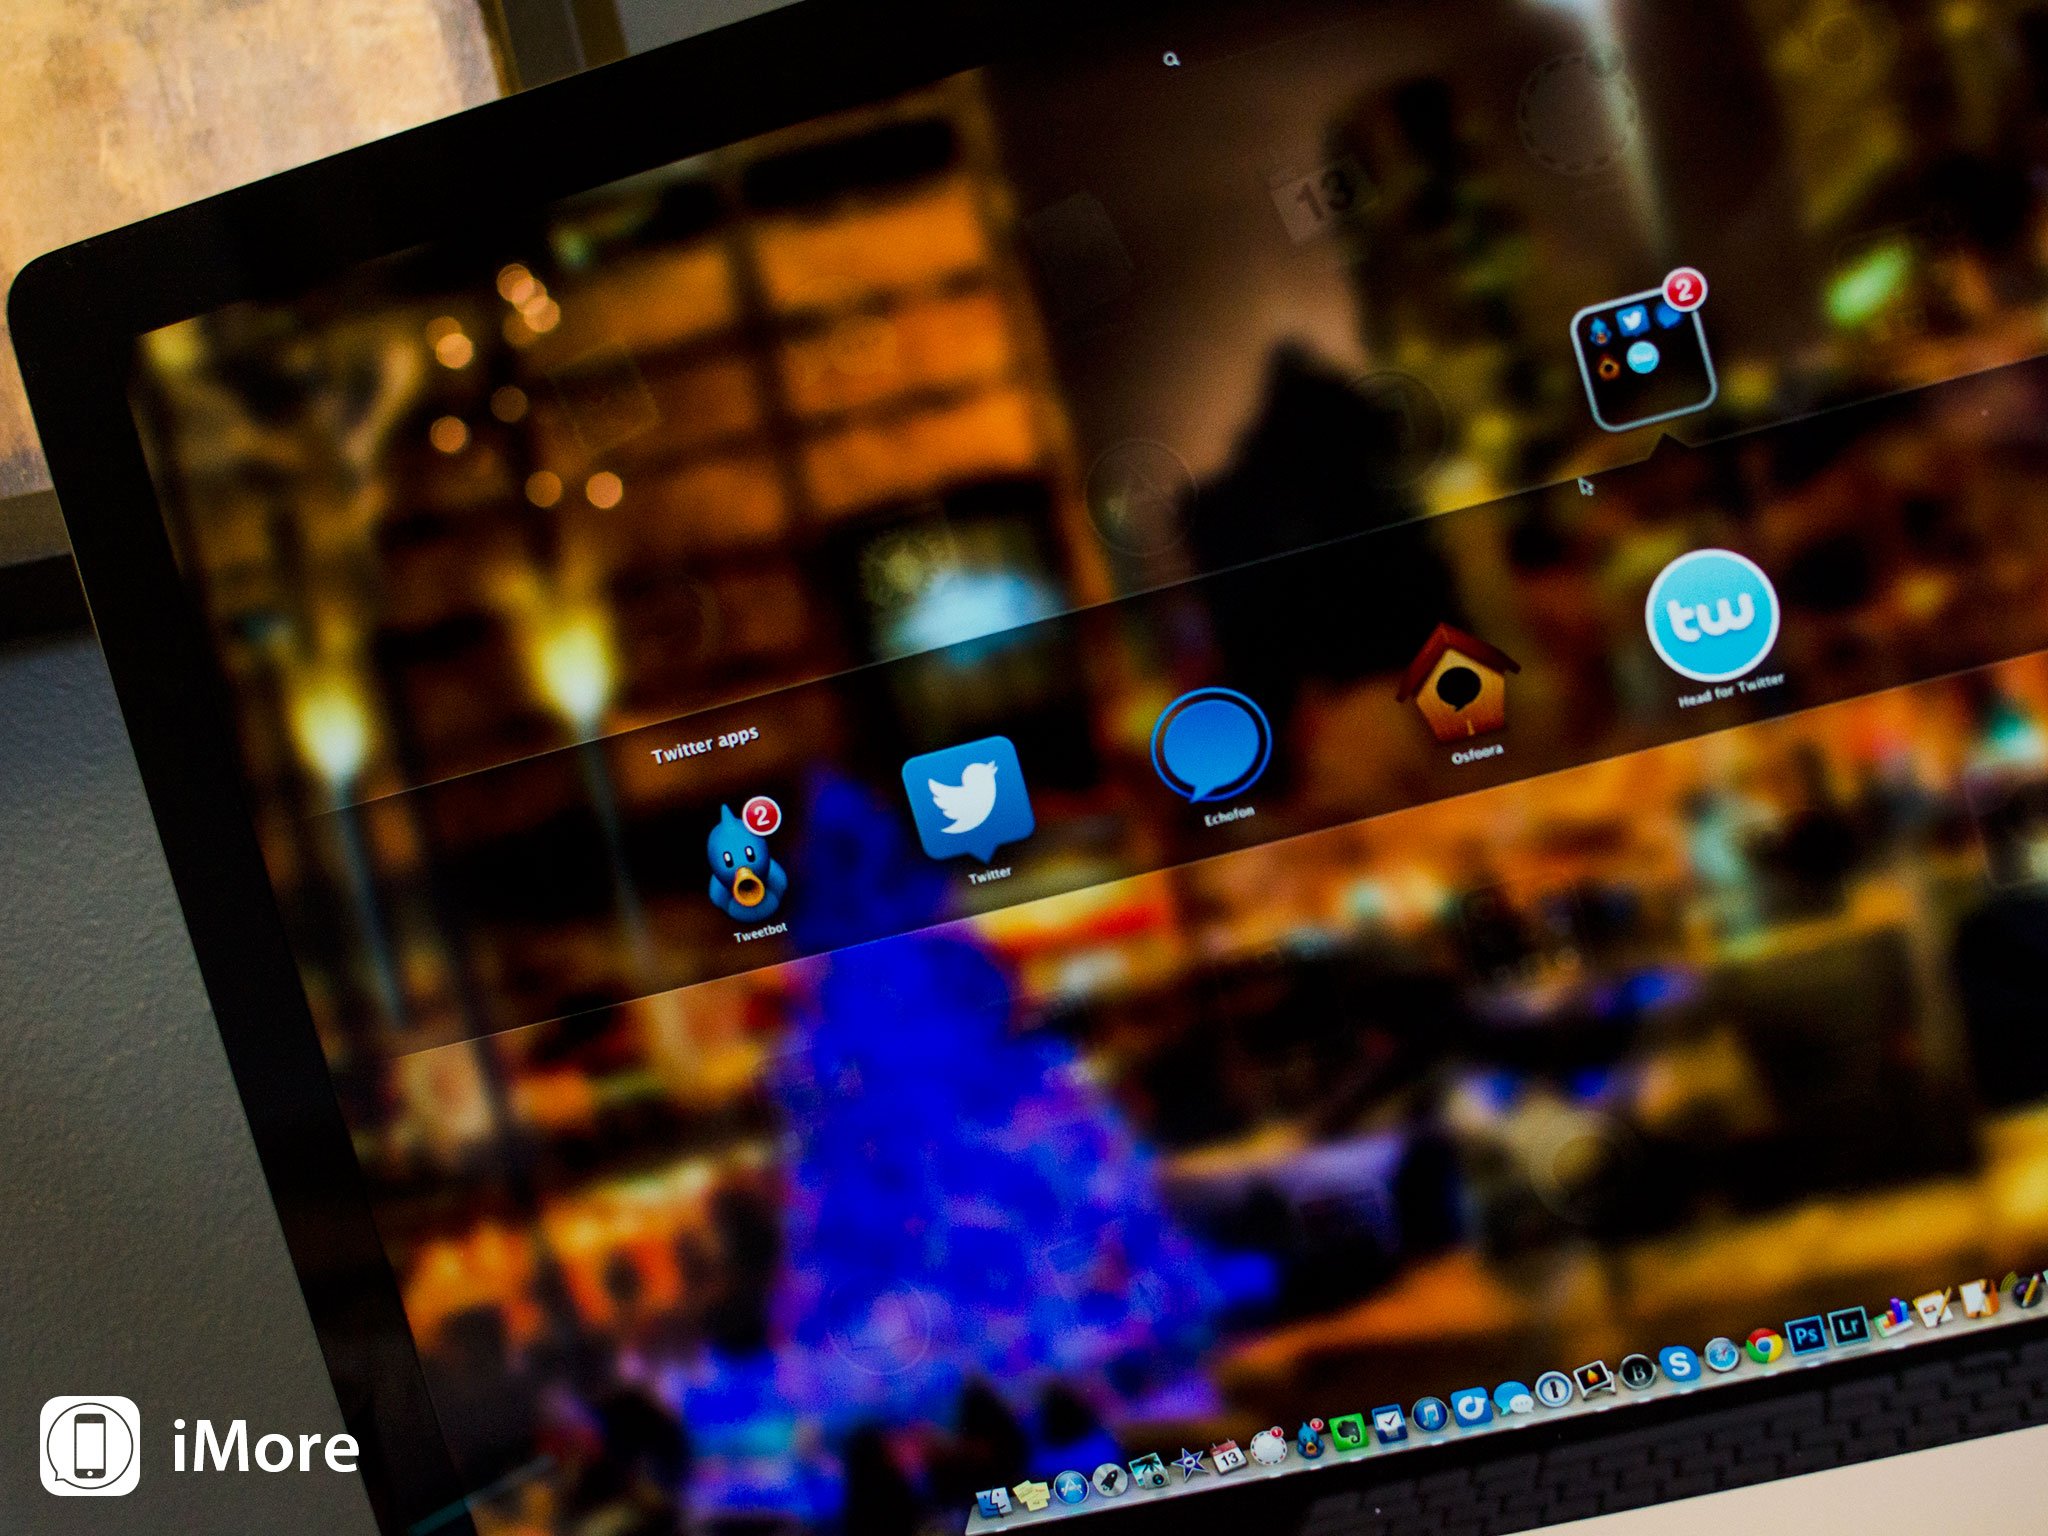 Best Twitter apps for Mac: Tweetbot, Twitter for Mac, Echofon, and more!